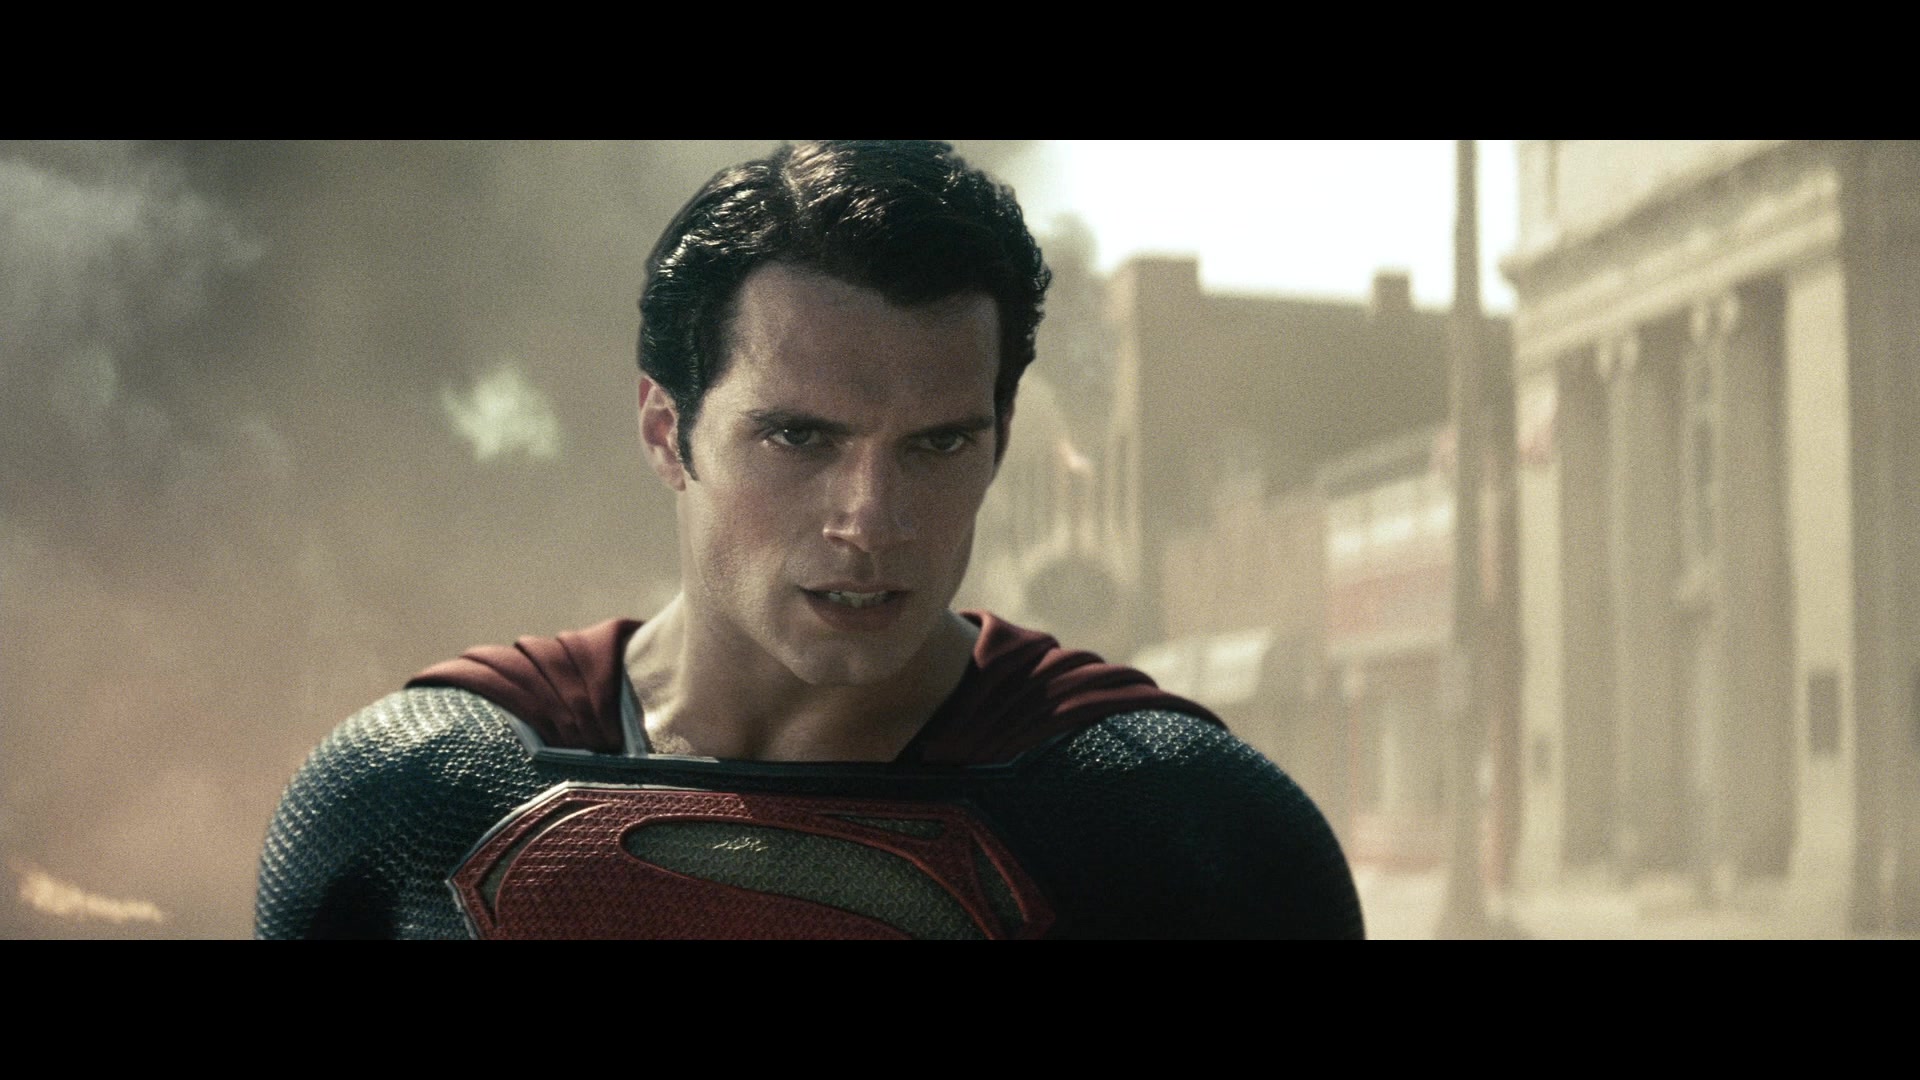 Superman (Henry Cavill) takes on Faora (Antje Traue) in Man of Steel (2013), Warner Bros. Pictures